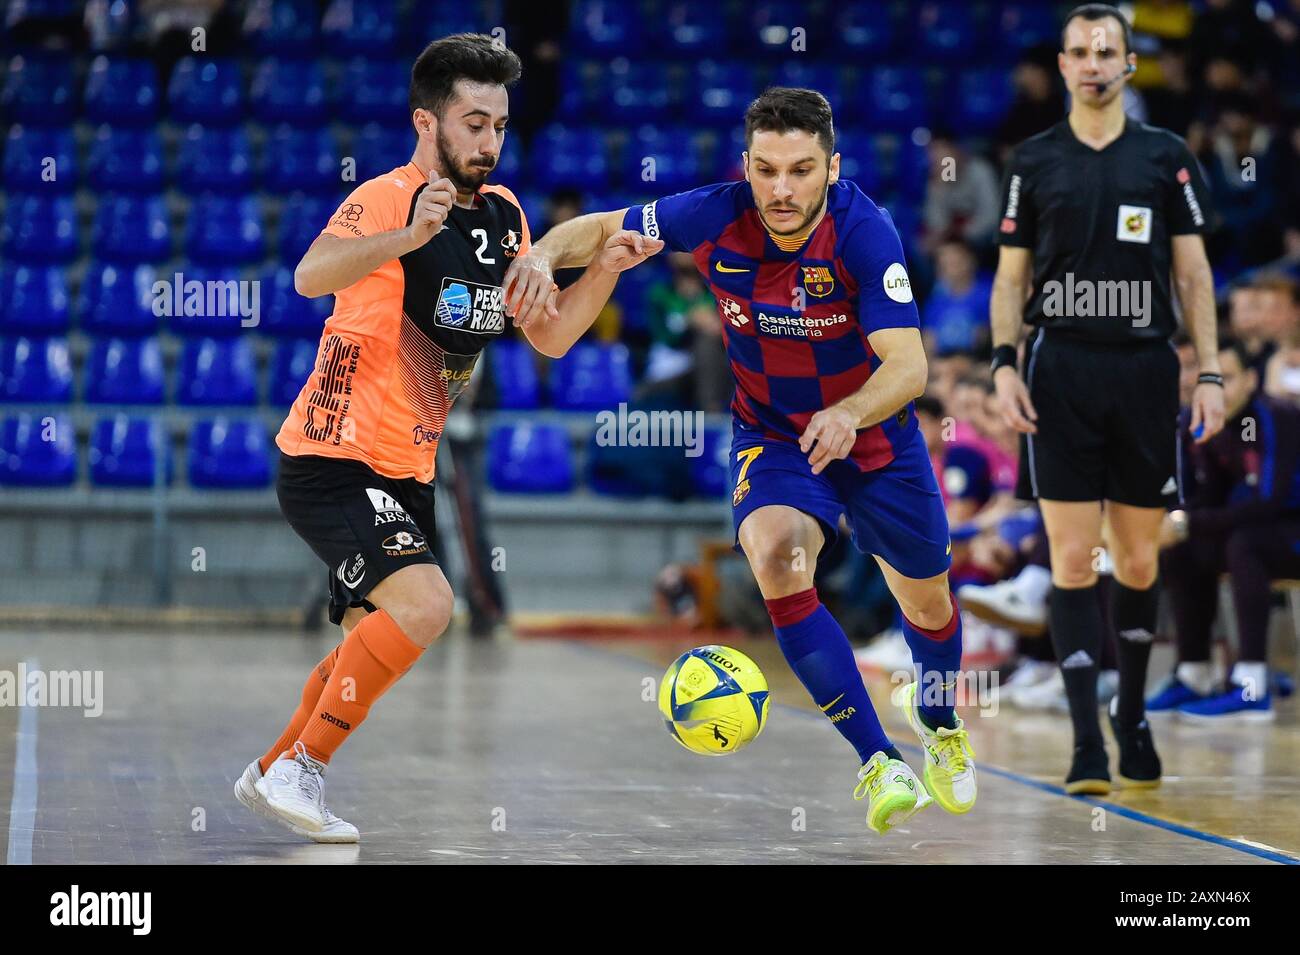 Barcelona, Spain. 12th Feb, 2020. Diego of FC Barcelona in action during  the Futsal Spanish Copa del Rey match played between FC Barcelona Lassa and  Pescados Ruben Burela at Palau Blaugrana on